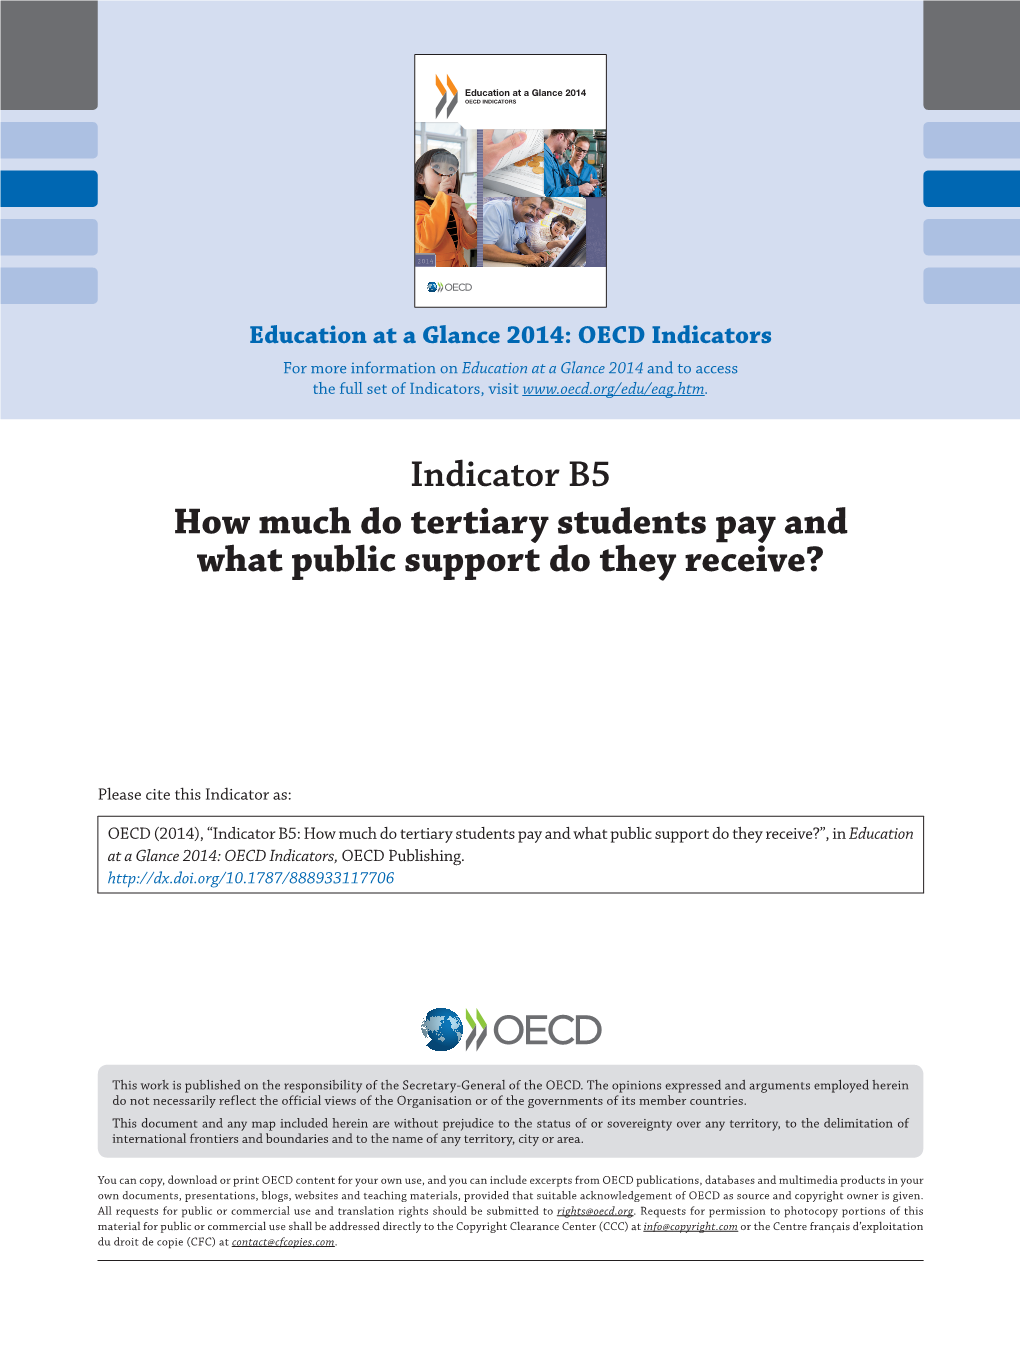 Indicator B5 How Much Do Tertiary Students Pay and What Public Support Do They Receive?